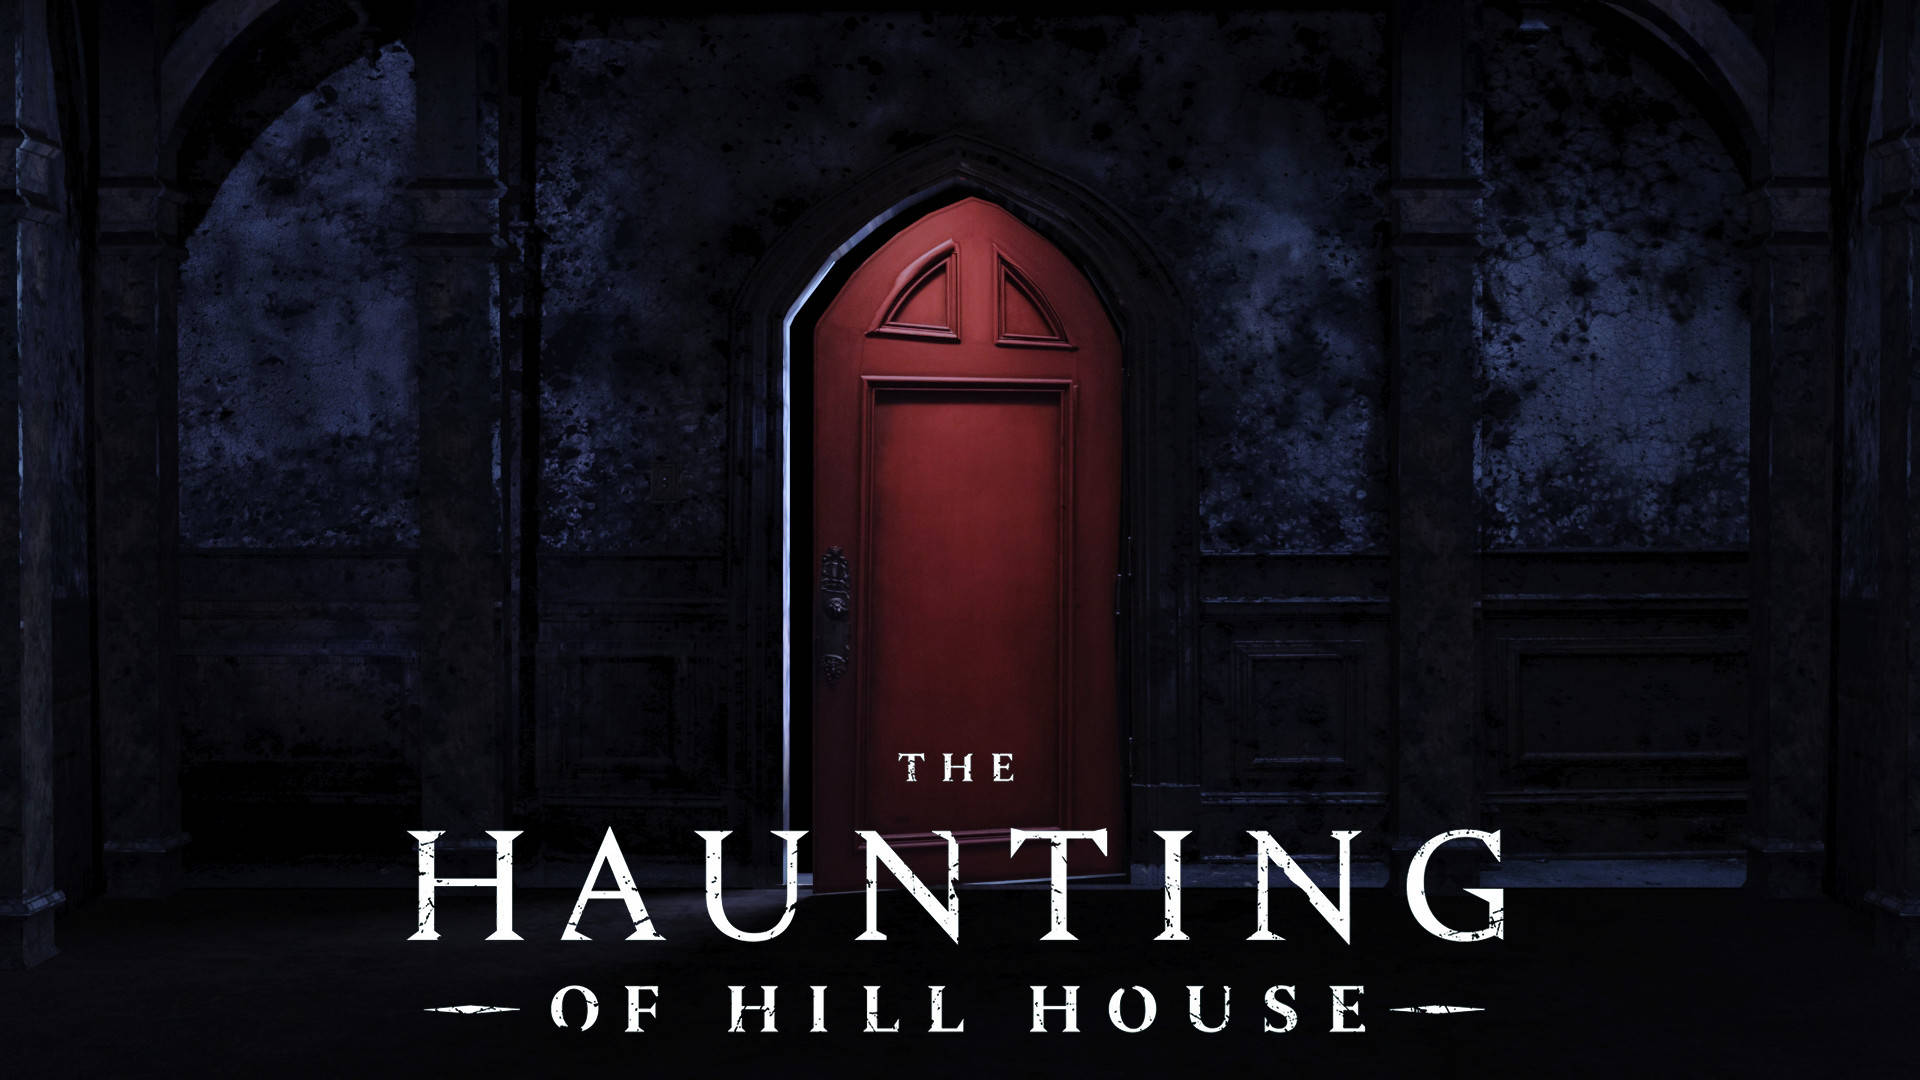 The Haunting Of Hill House Red Door Wallpaper